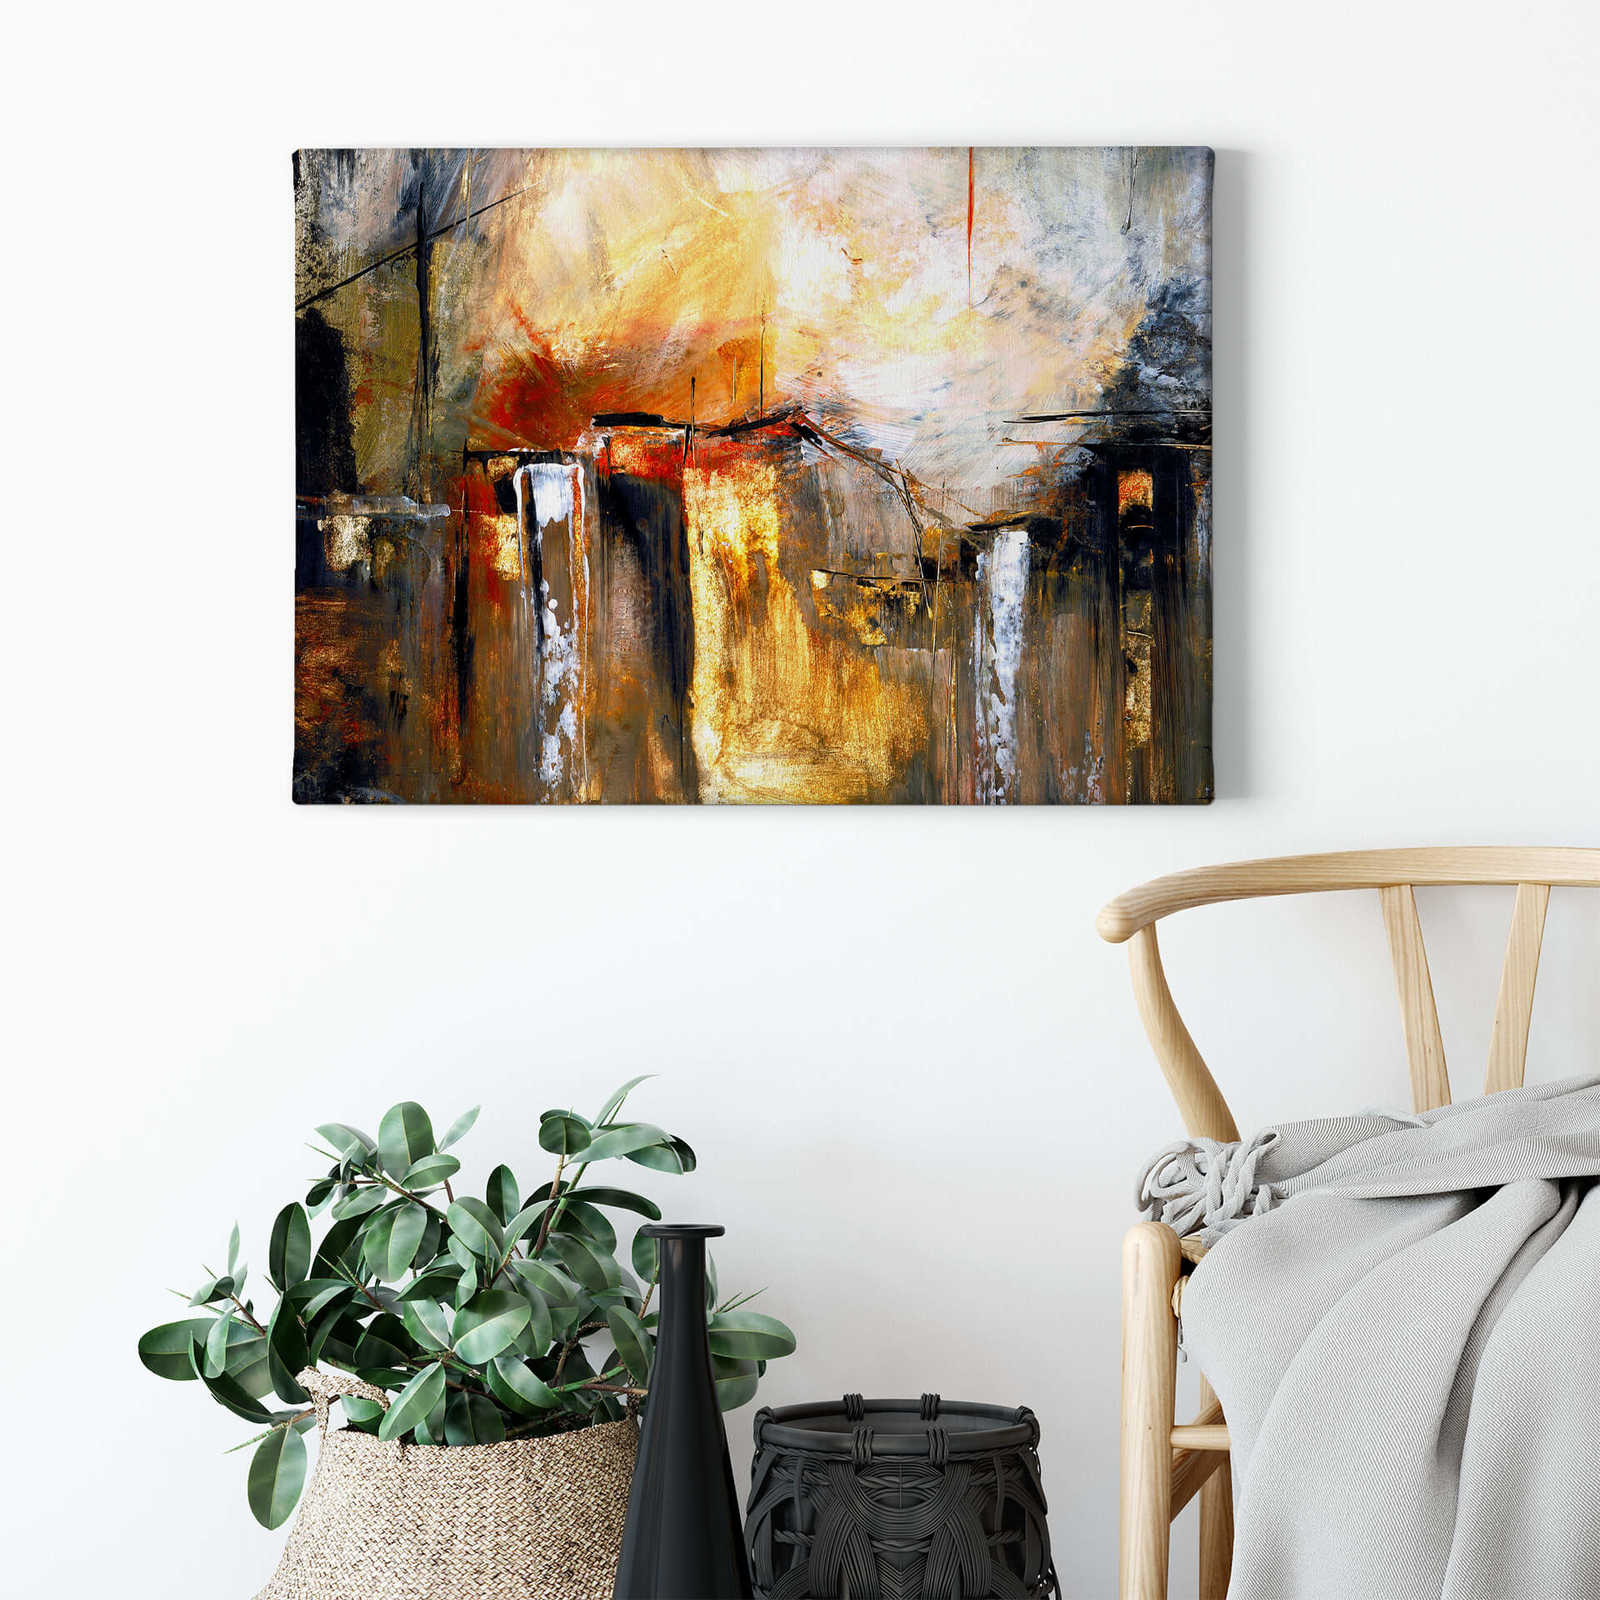             Abstract canvas print print by Niksic
        